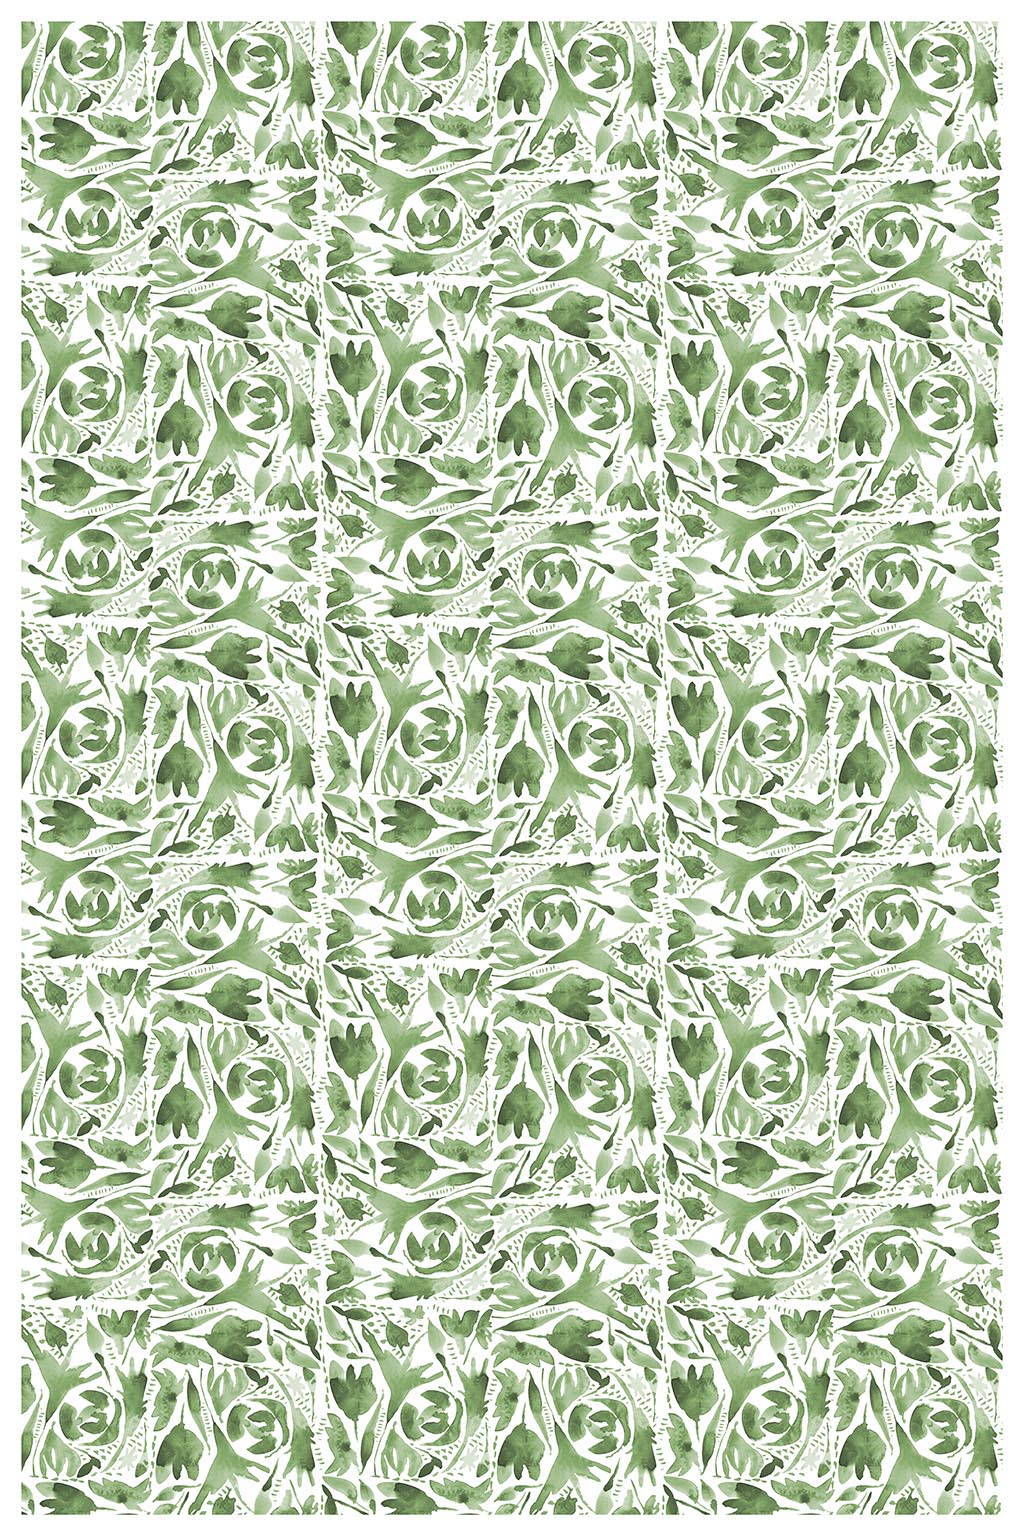 Repeating watercolor floral design in sage greens. Print measures 24x36 inches